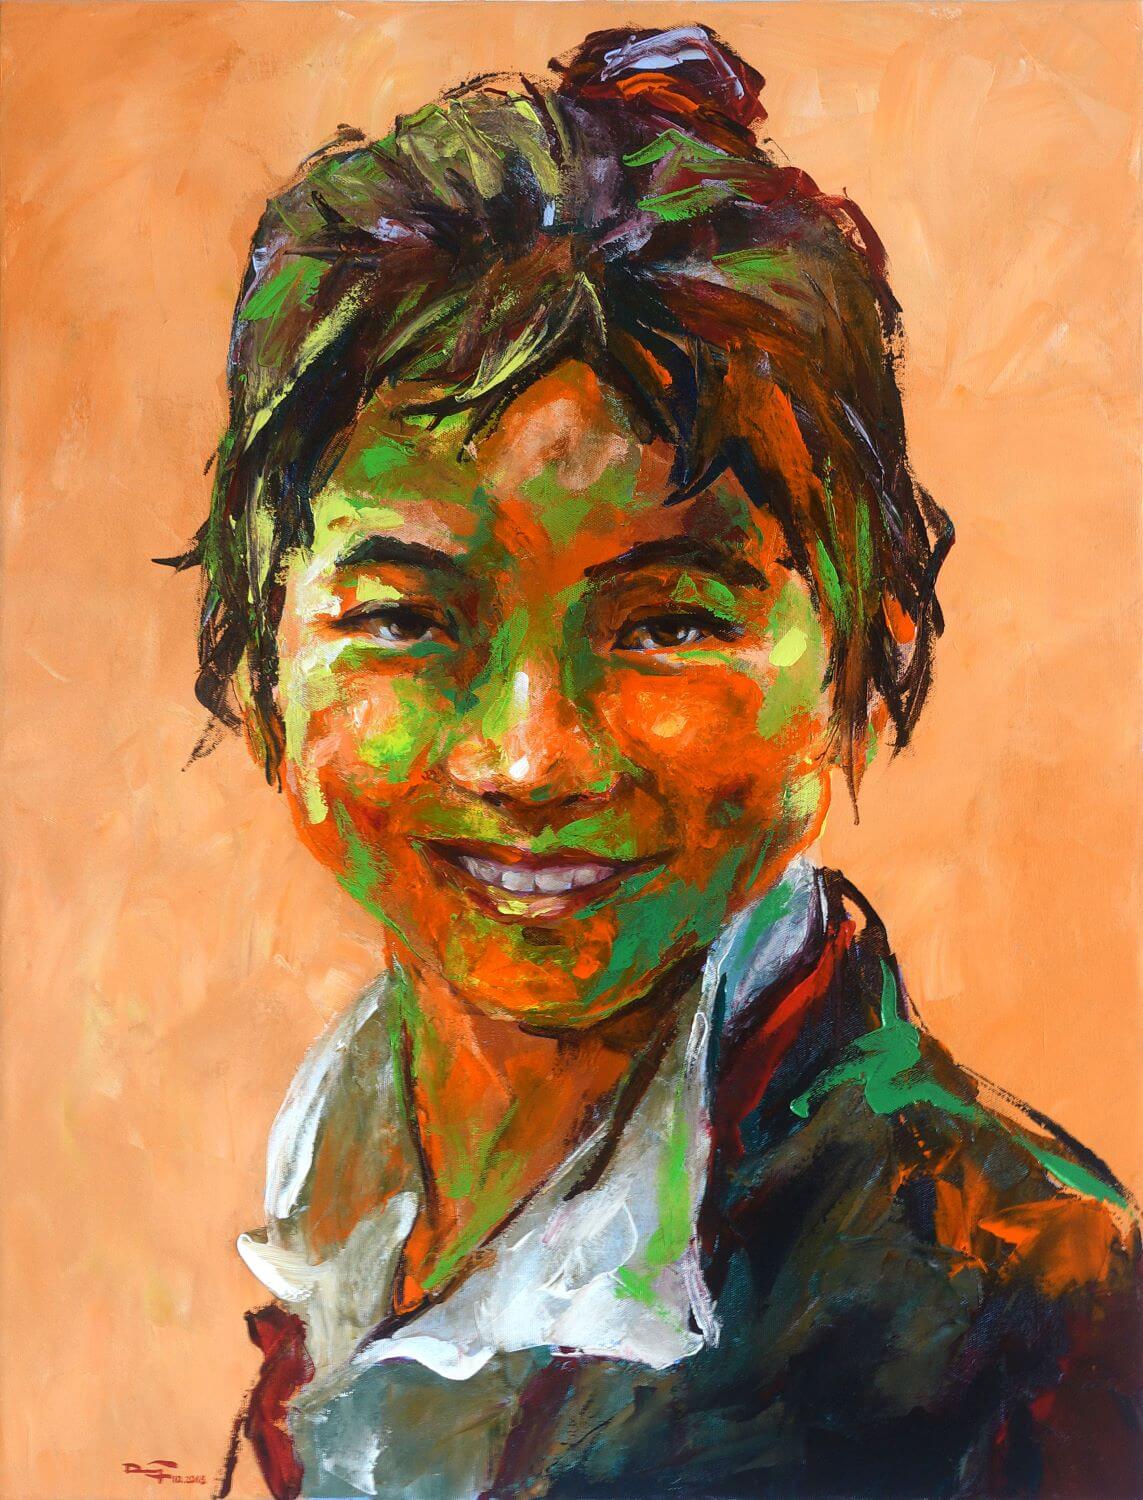 portrait 71 Vietnamese Acrylic on canvas by Artist Mai Huy Dung